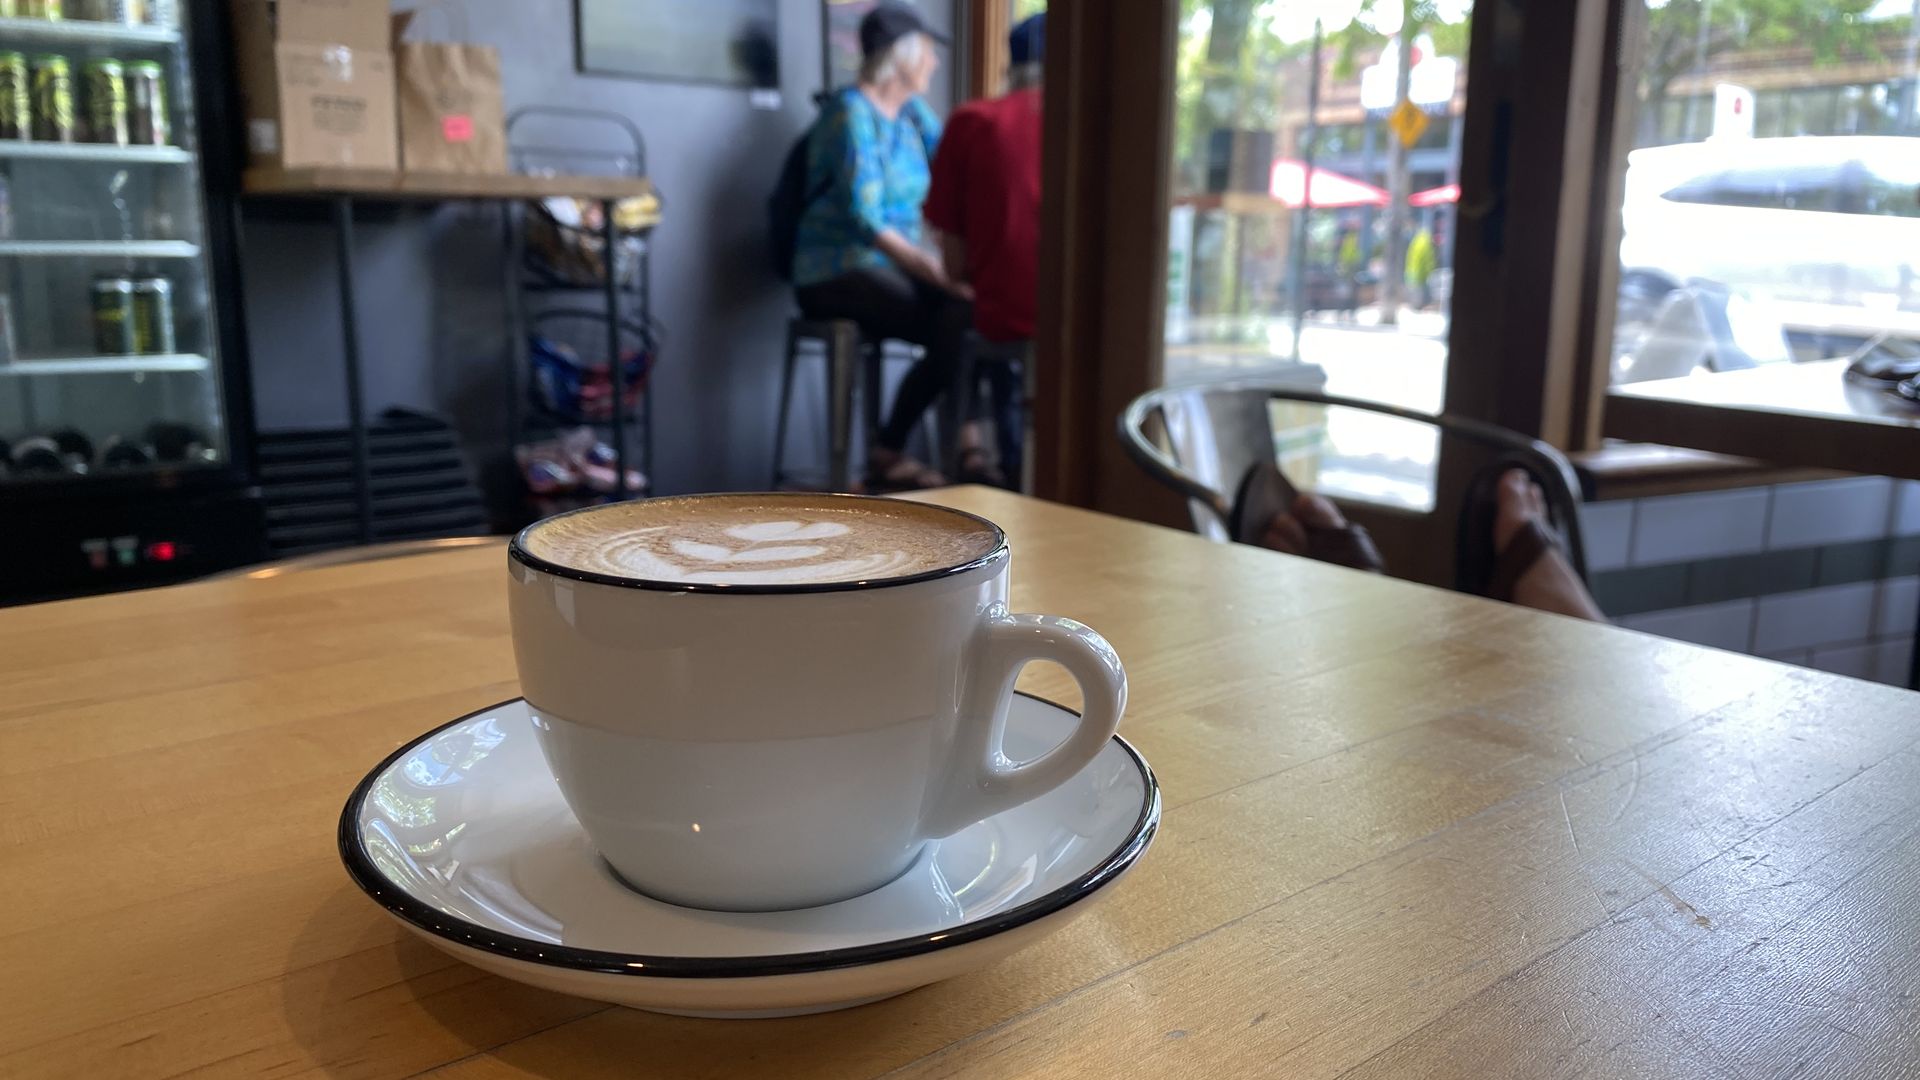 A cappuccino with decorative foam art on in a porcelain cup and saucer on a wooden table, with people talking and windows in background.